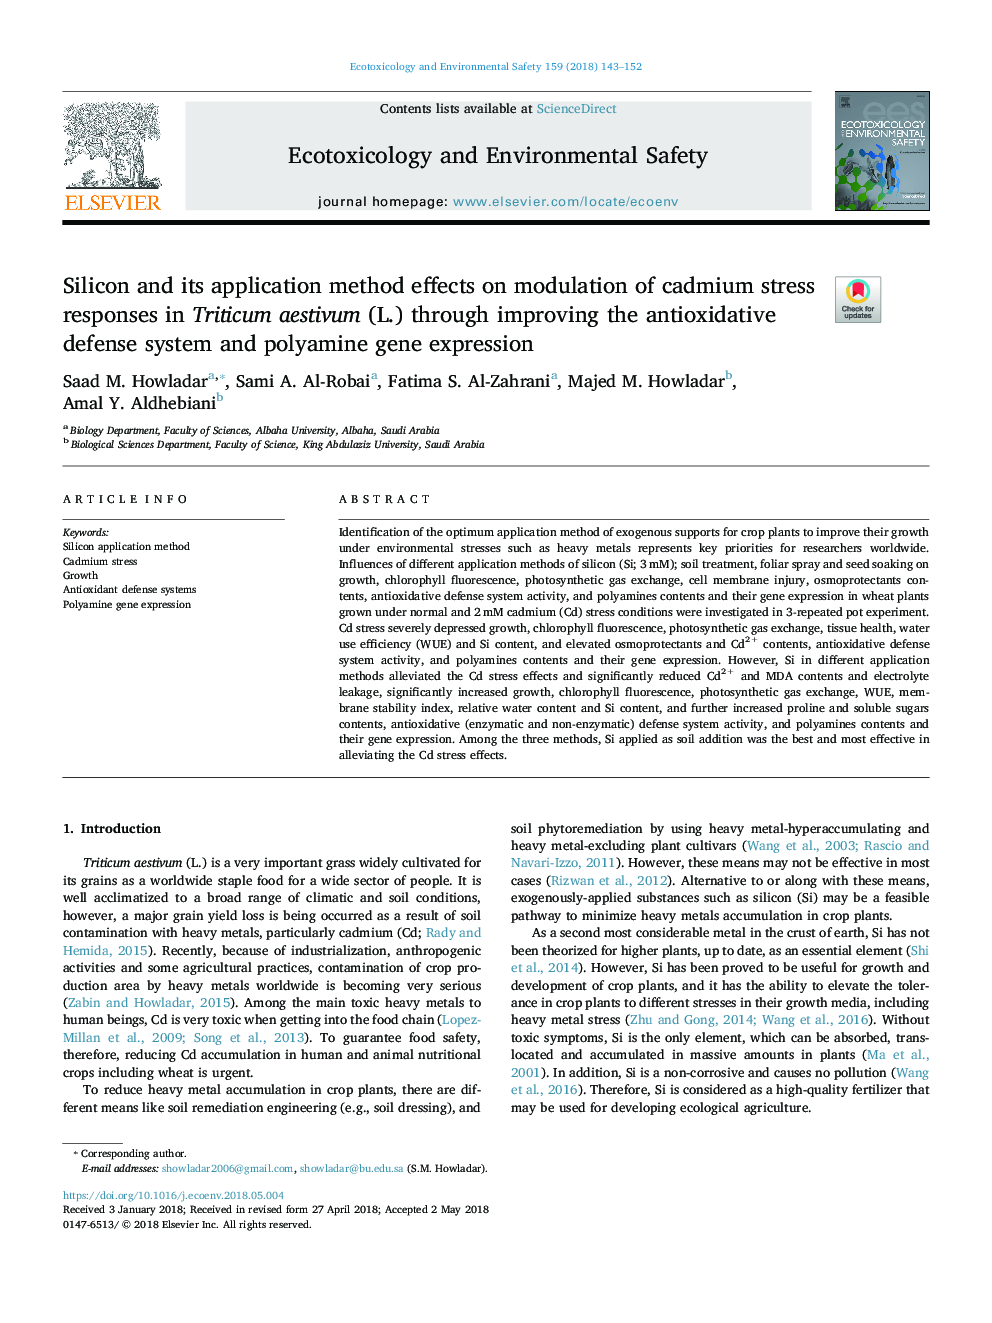 Silicon and its application method effects on modulation of cadmium stress responses in Triticum aestivum (L.) through improving the antioxidative defense system and polyamine gene expression